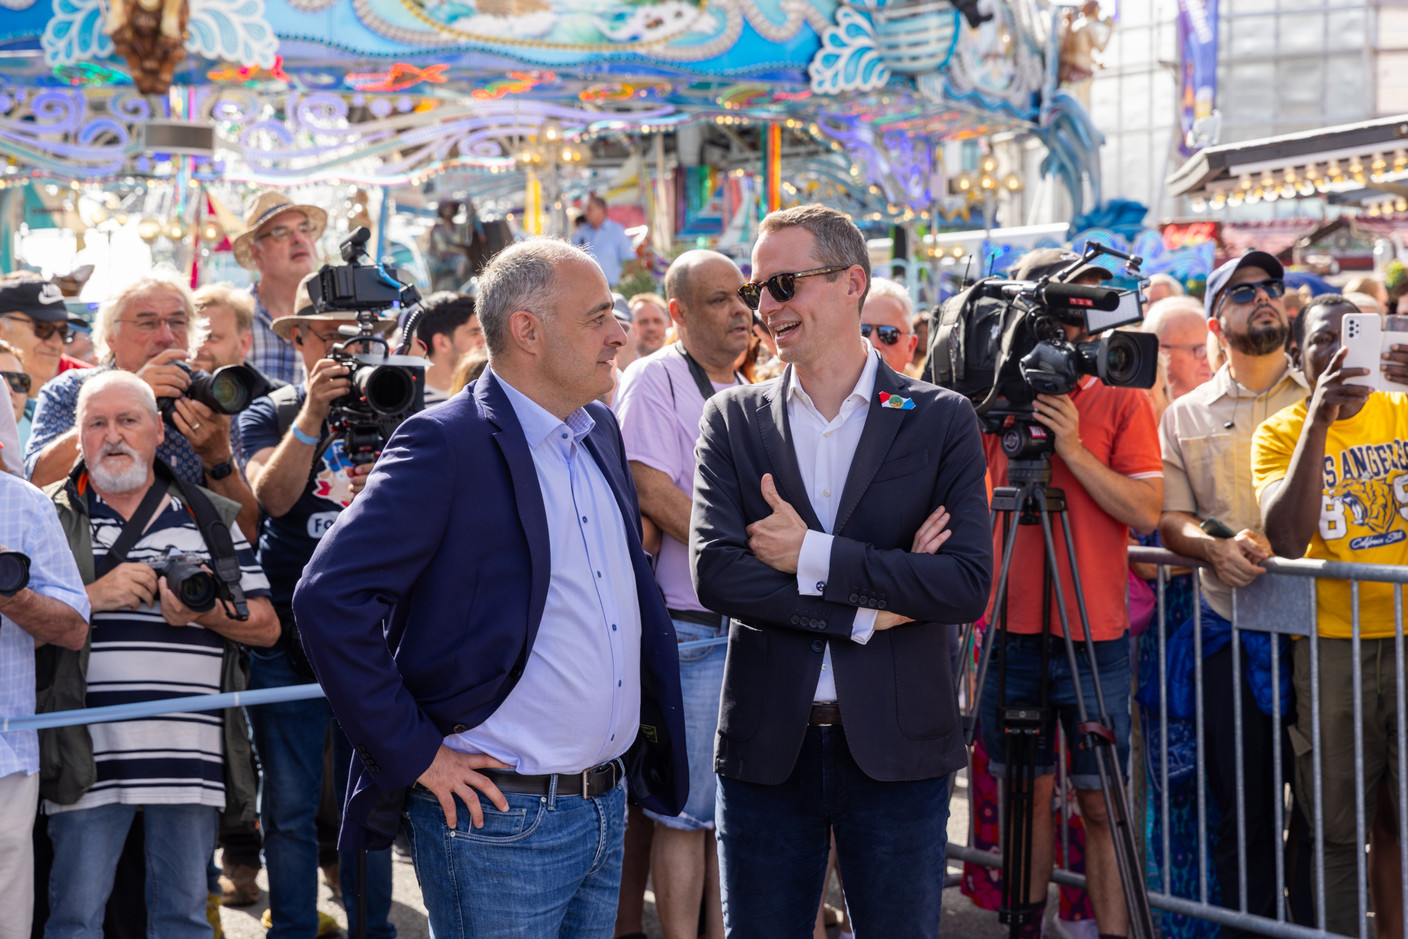 The aldermen of the City of Luxembourg inaugurated the fair. Pictured here are alderman Patrick Goldschmidt (DP) on the left and first alderman Serge Wilmes (CSV) on right.   Photo: Romain Gamba/Maison Moderne